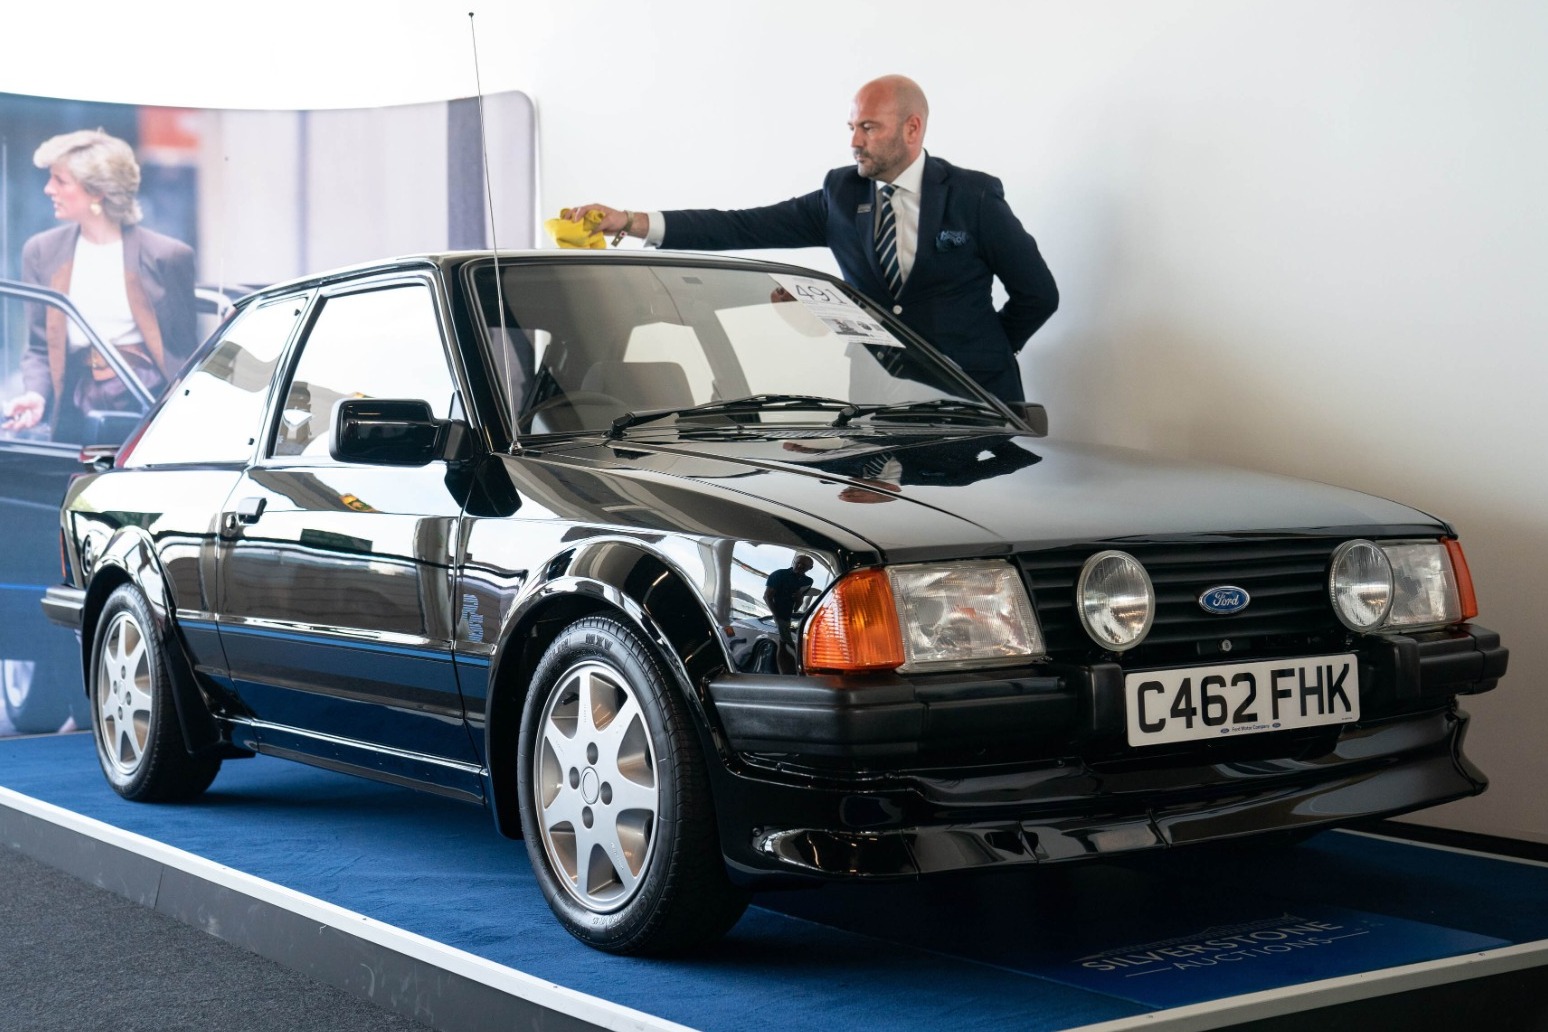 Diana’s Ford Escort to be sold at auction 